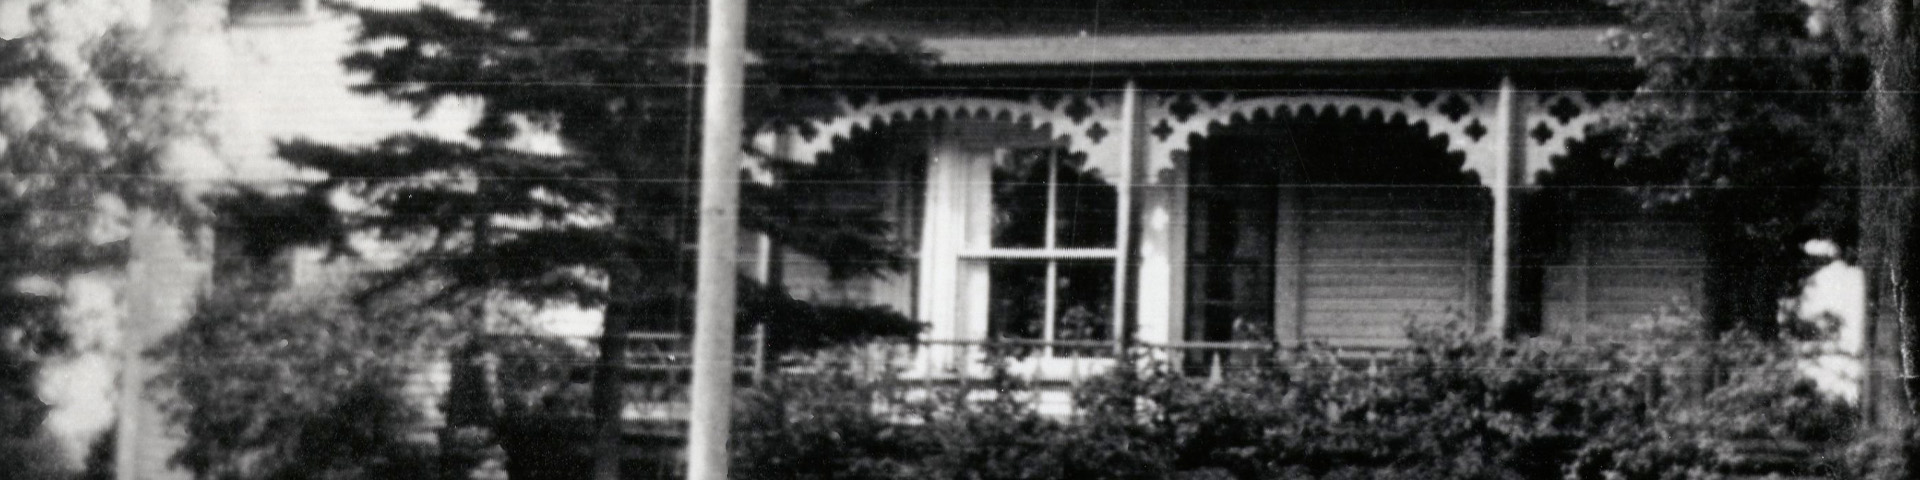 black and white image of a cottage